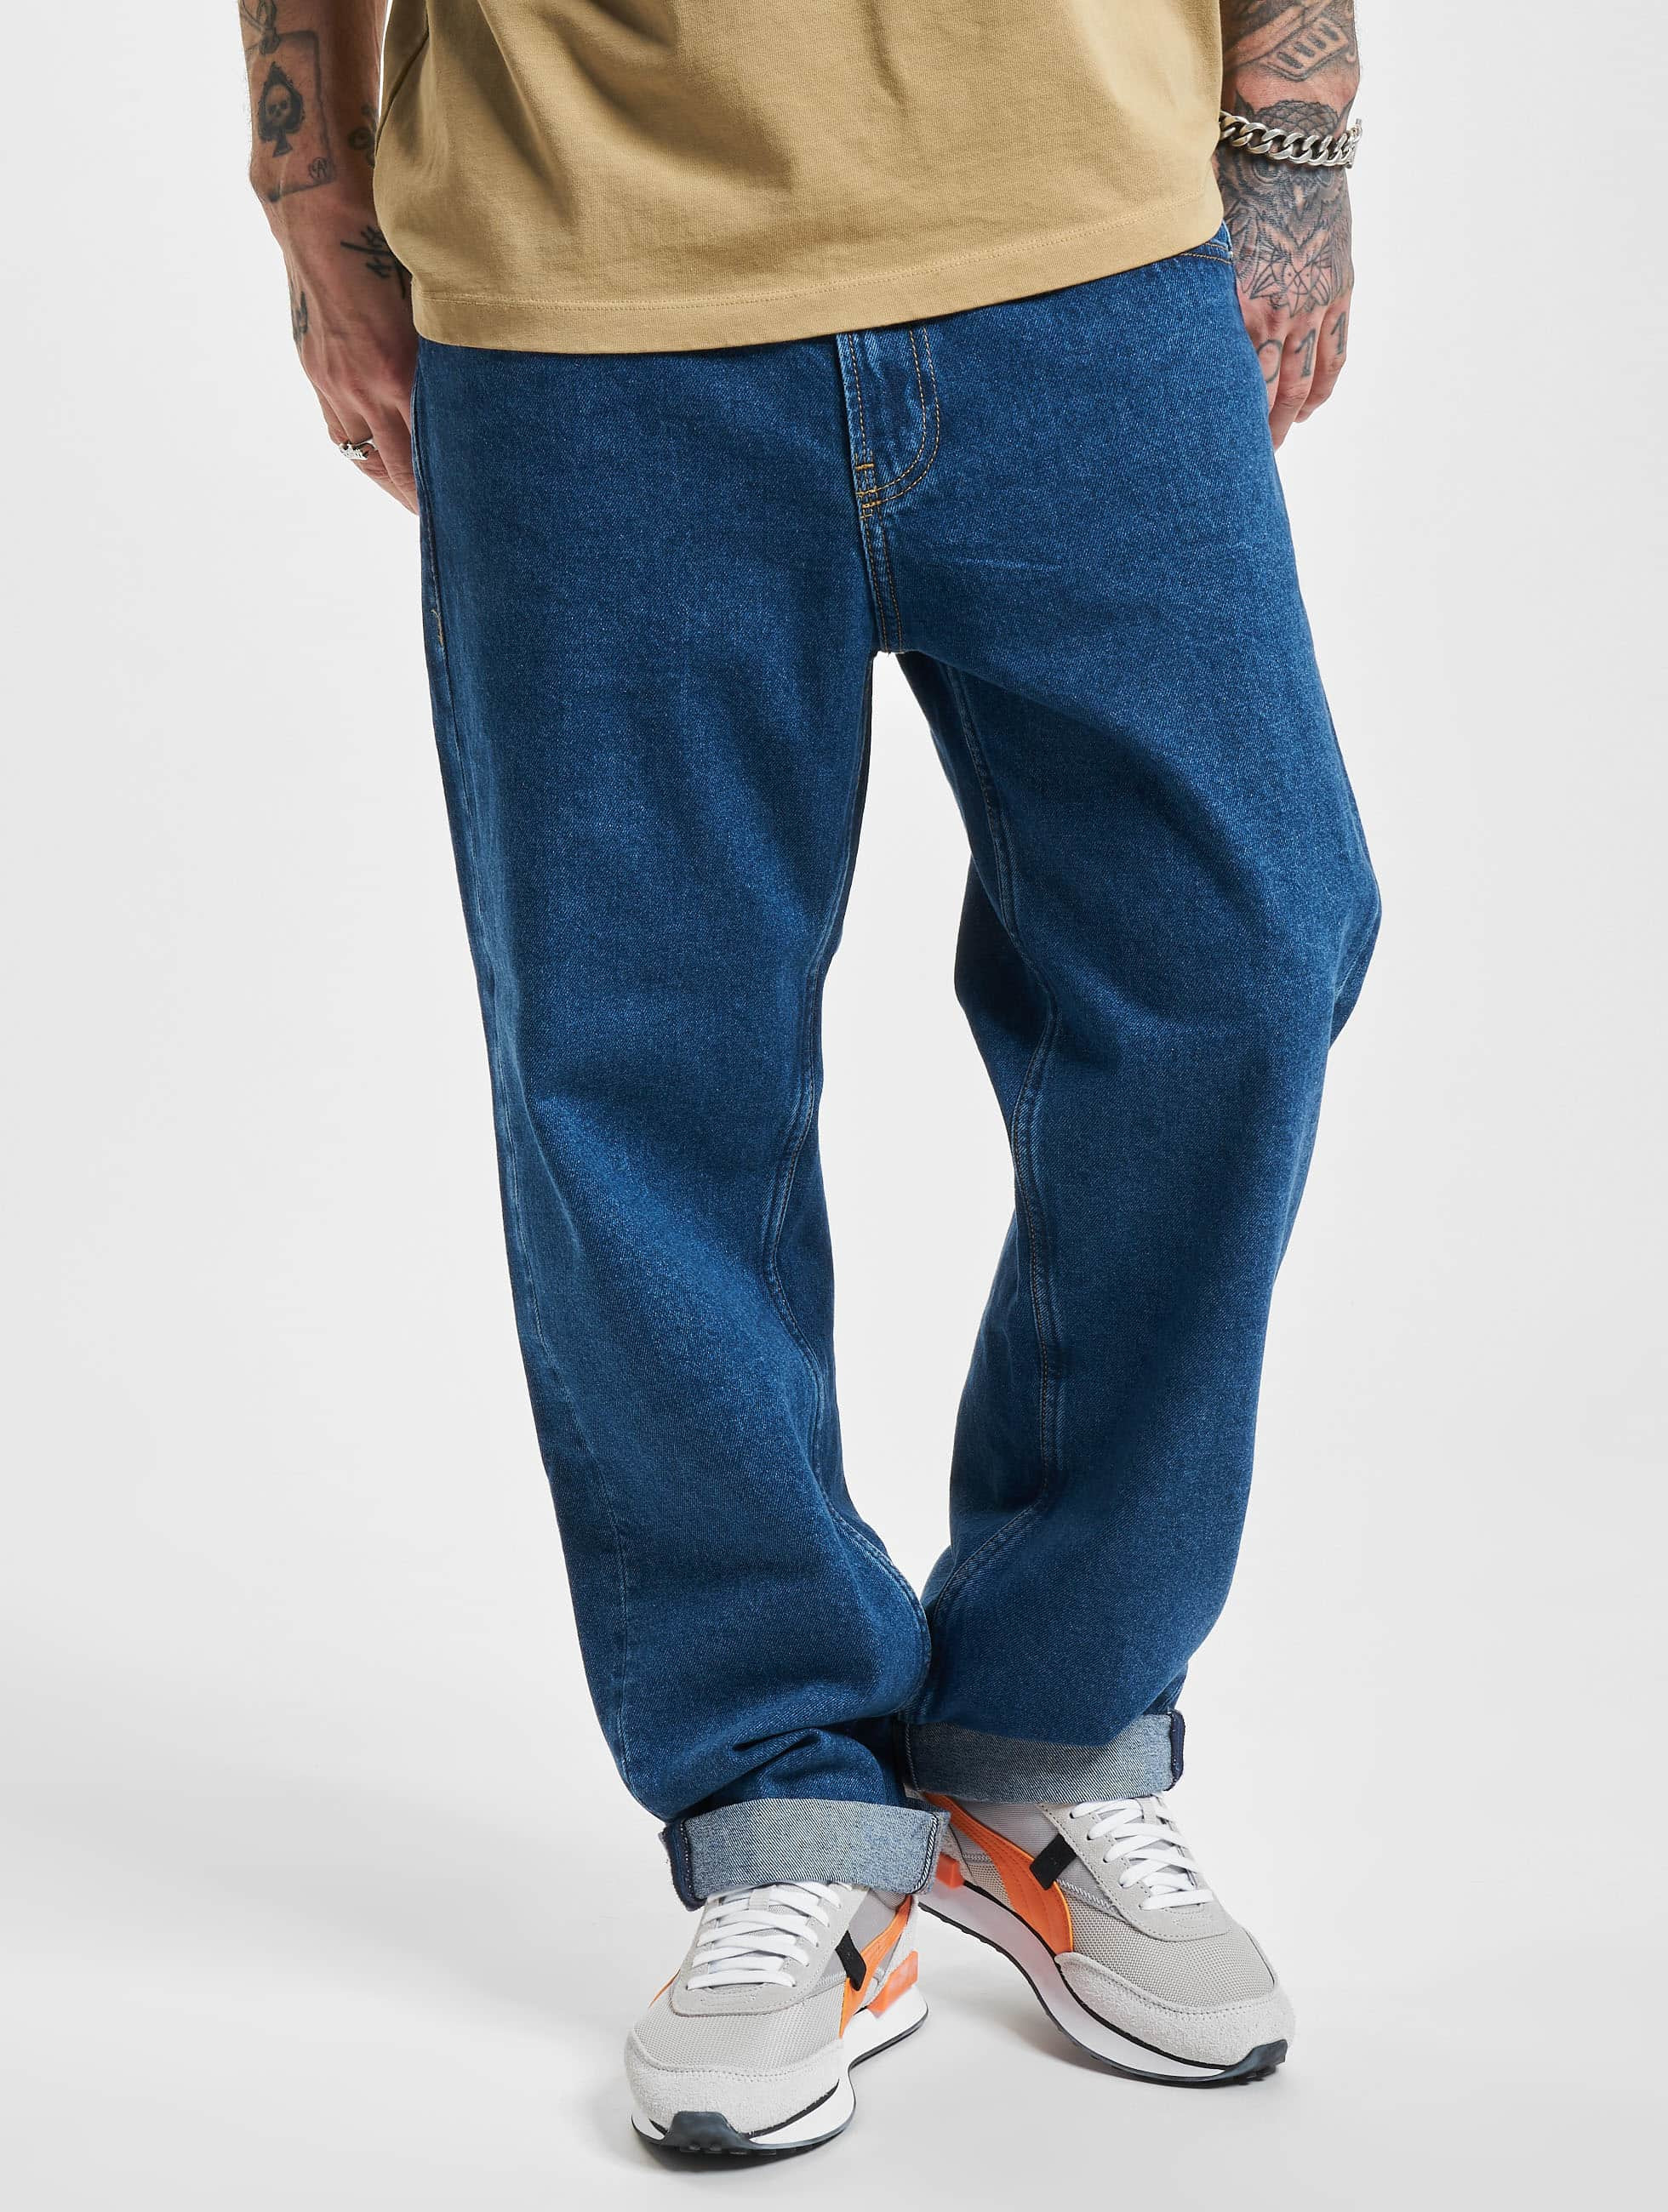 Calvin Klein Jeans / Straight Fit Jeans 90s in blue 971385